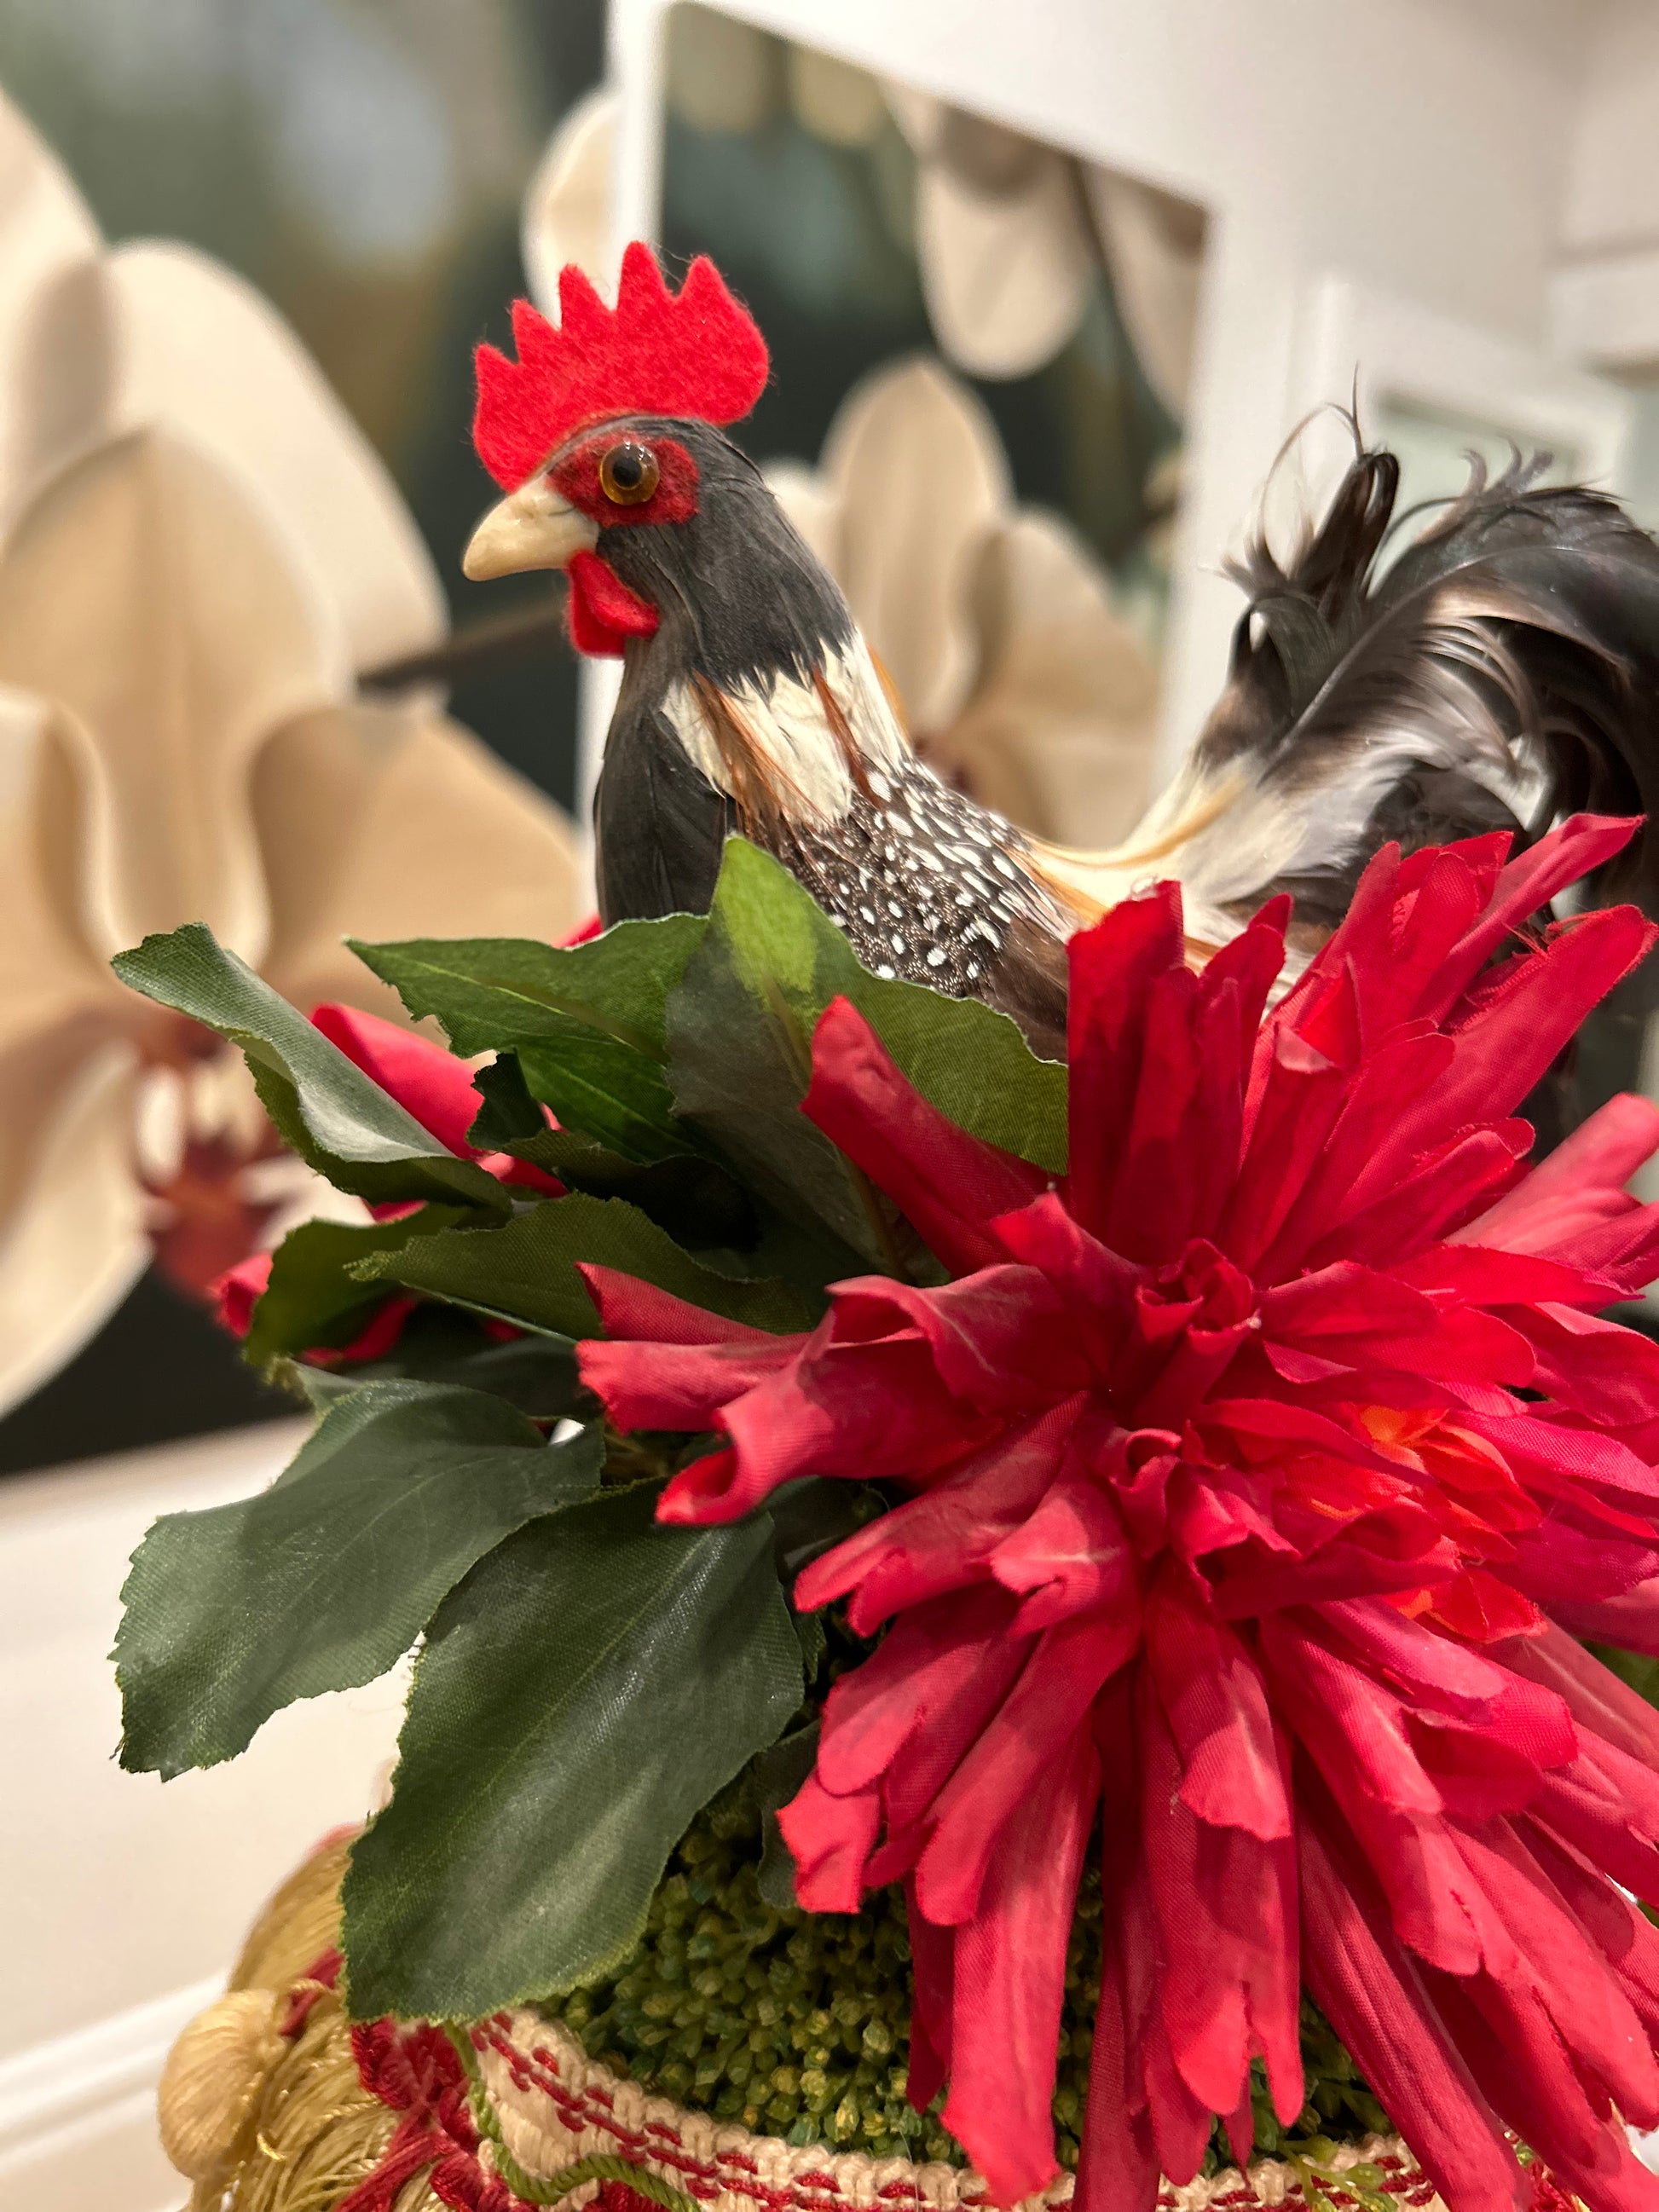 Flower Arrangements and Rooster Accents Creating Bold, Jazzy Table  Centerpieces